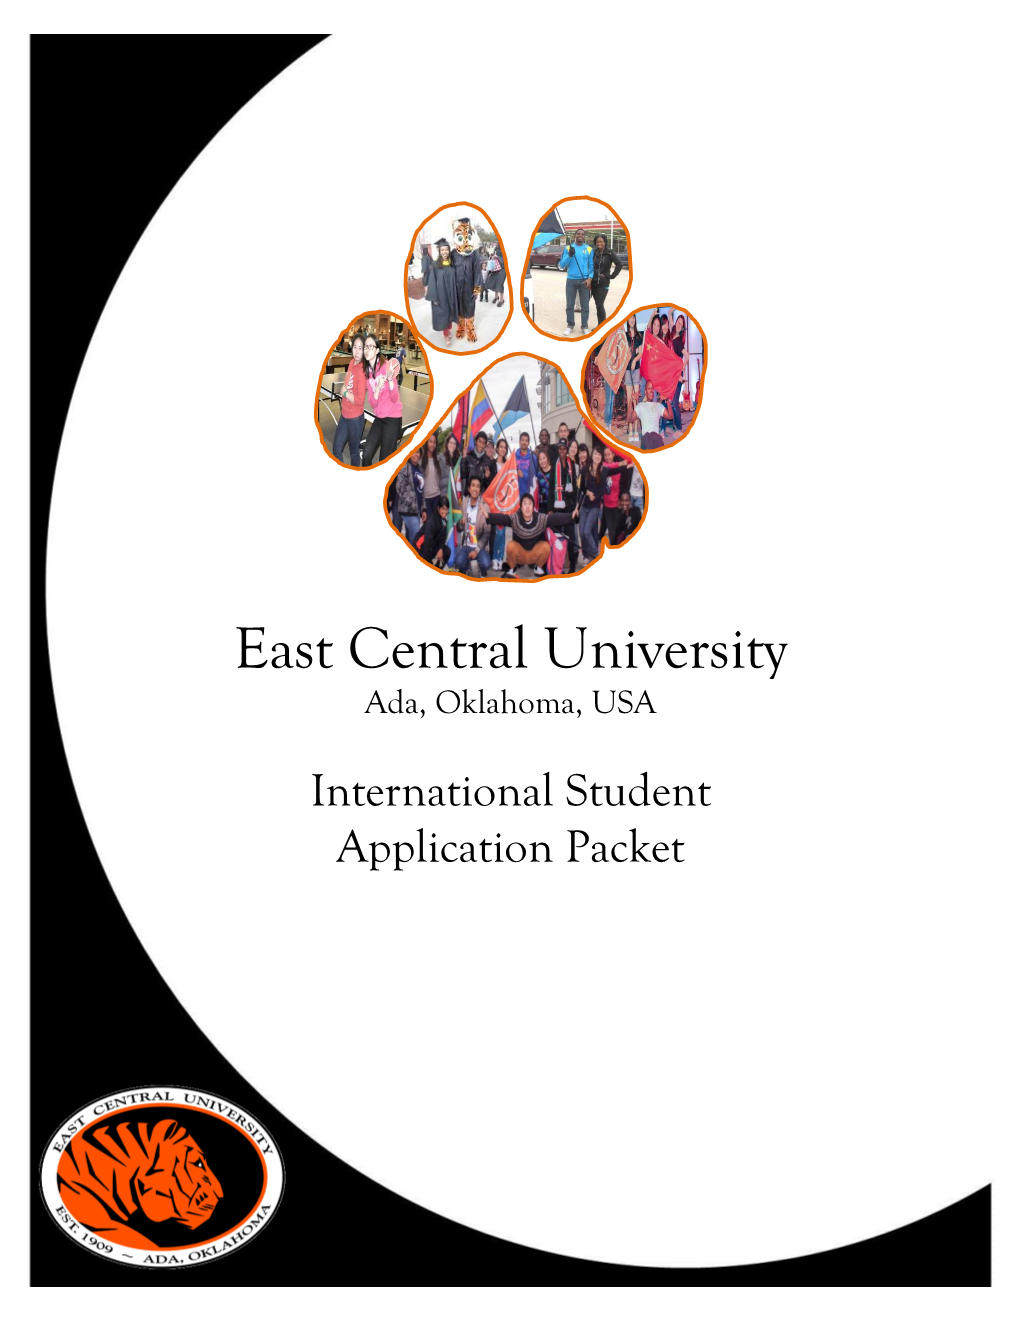 Thank You Or Your Interest in East Central University